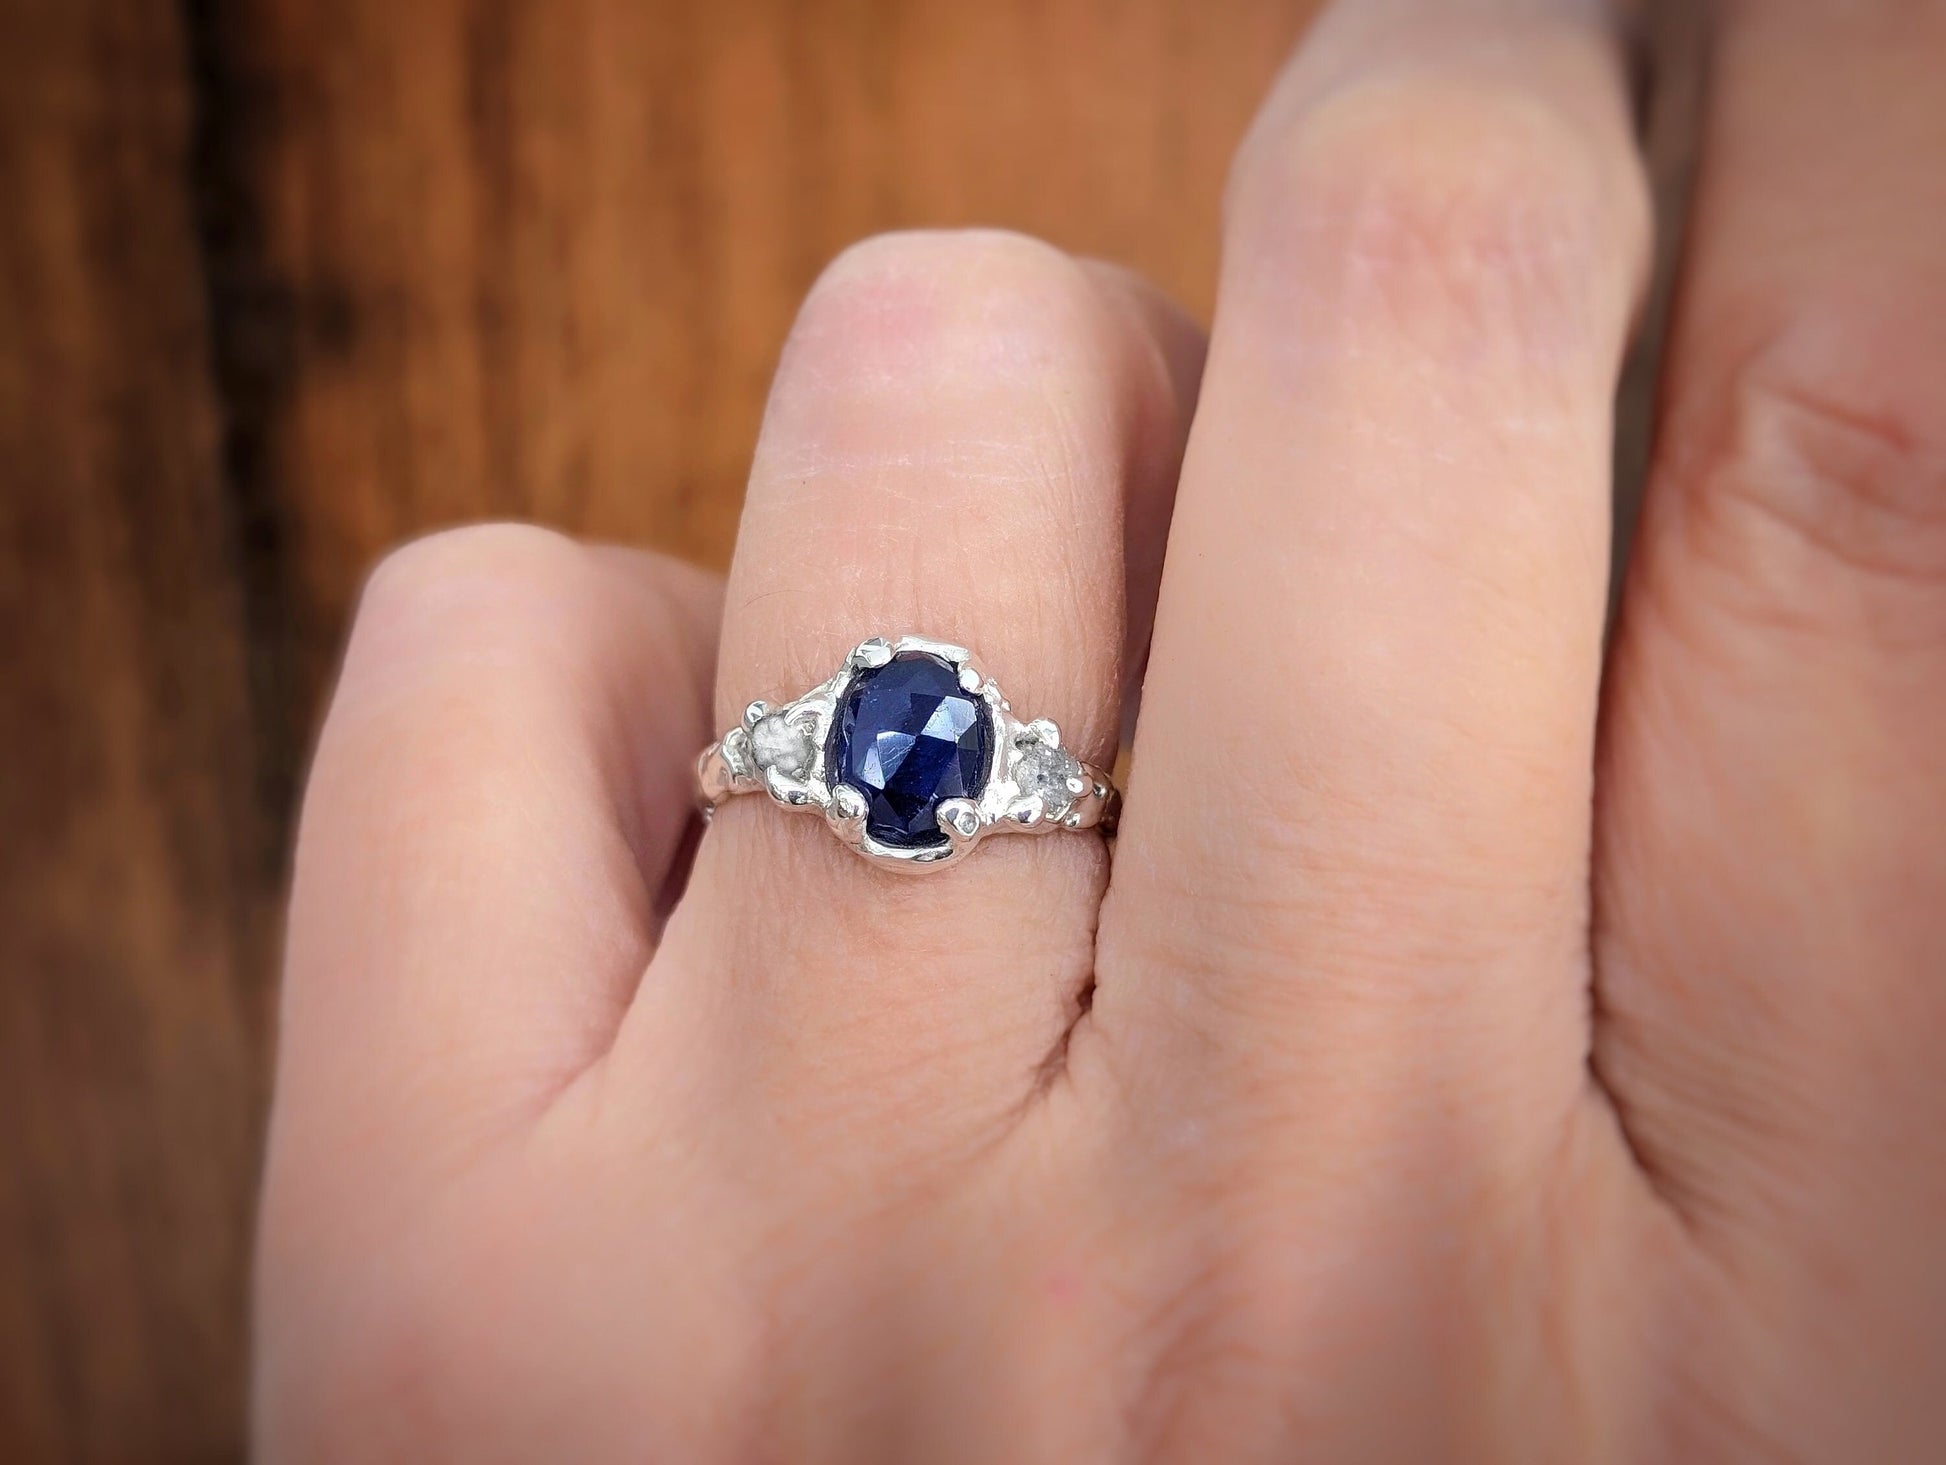 Woman's hand wearing an Oval Blue Sapphire and 2 small raw diamonds set by prongs on a textured Molten Solid Sterling Silver band